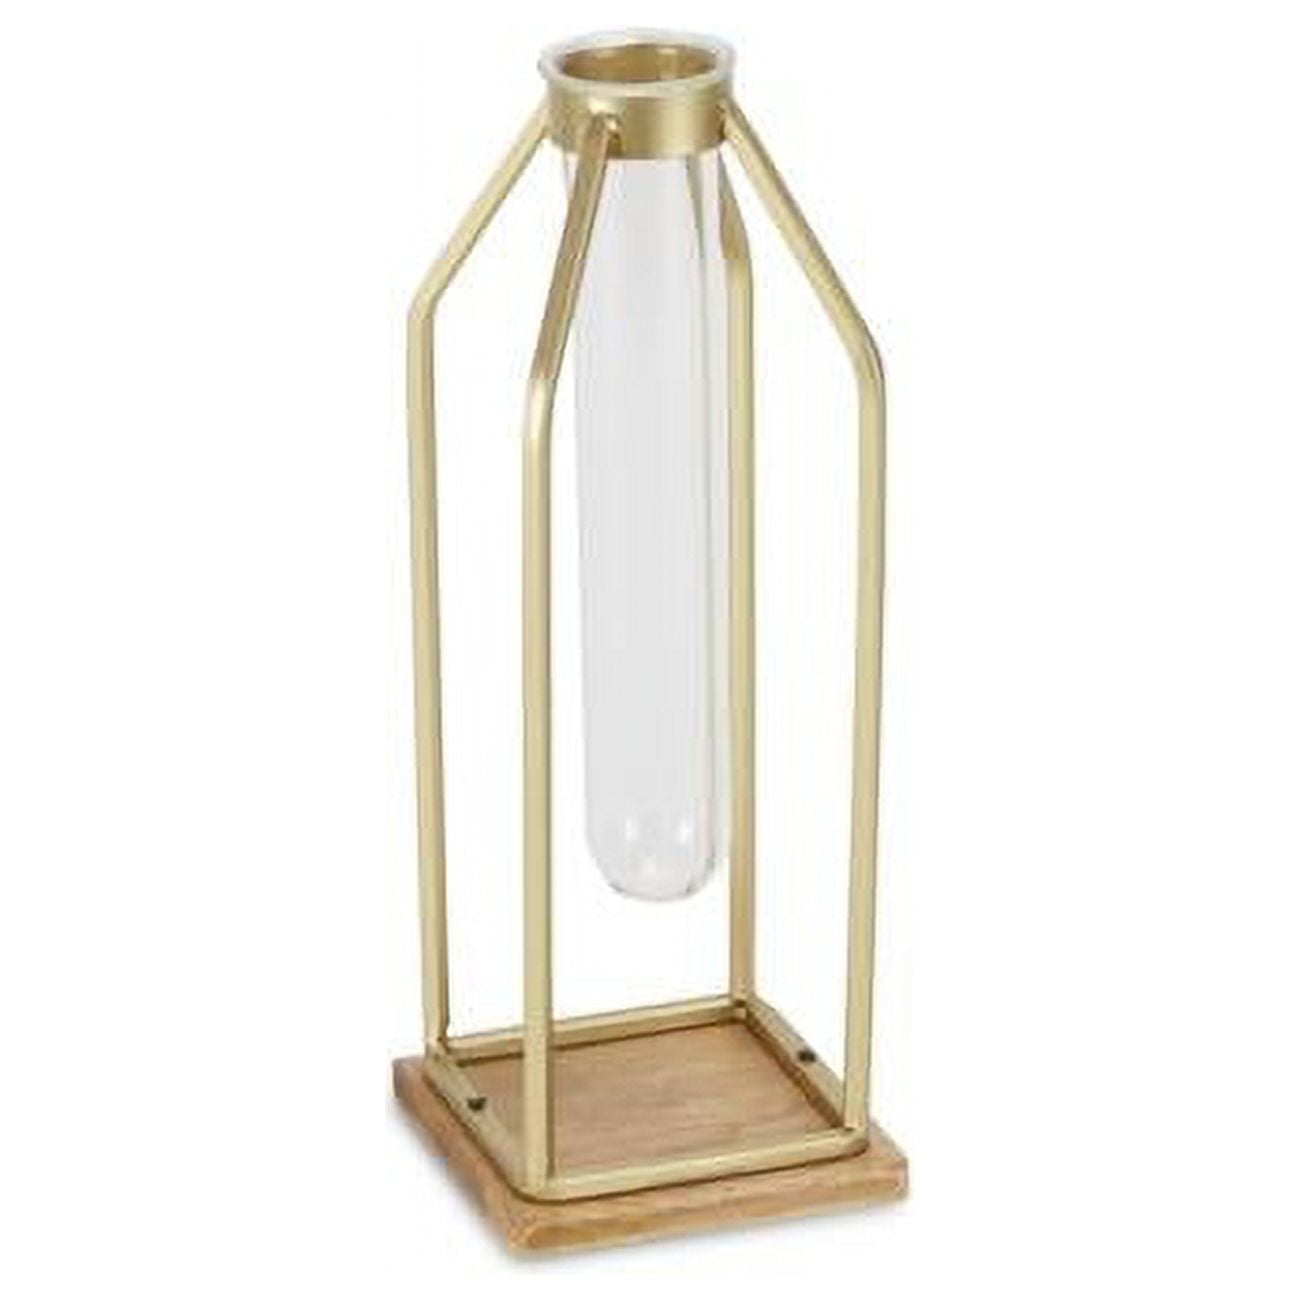 5483s-gd Tall Metal Stand With Glass Tube, Gold